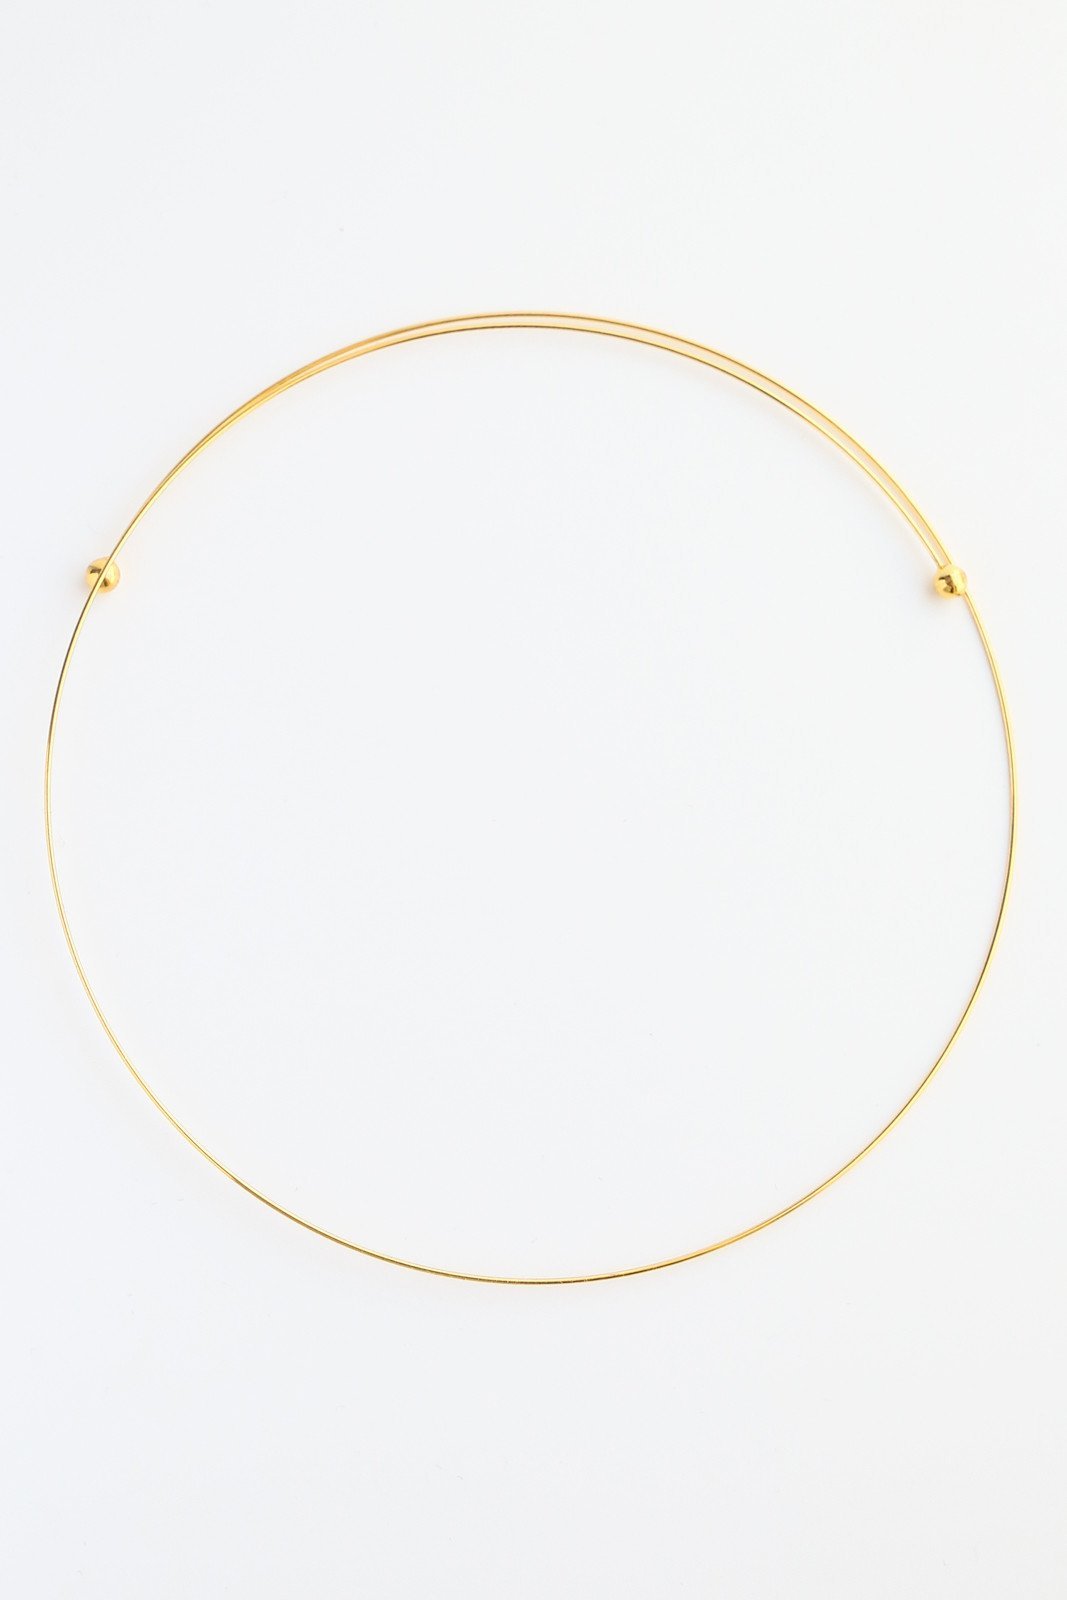 Barely there Choker - Boutique Minimaliste has waterproof, durable, elegant and vintage inspired jewelry